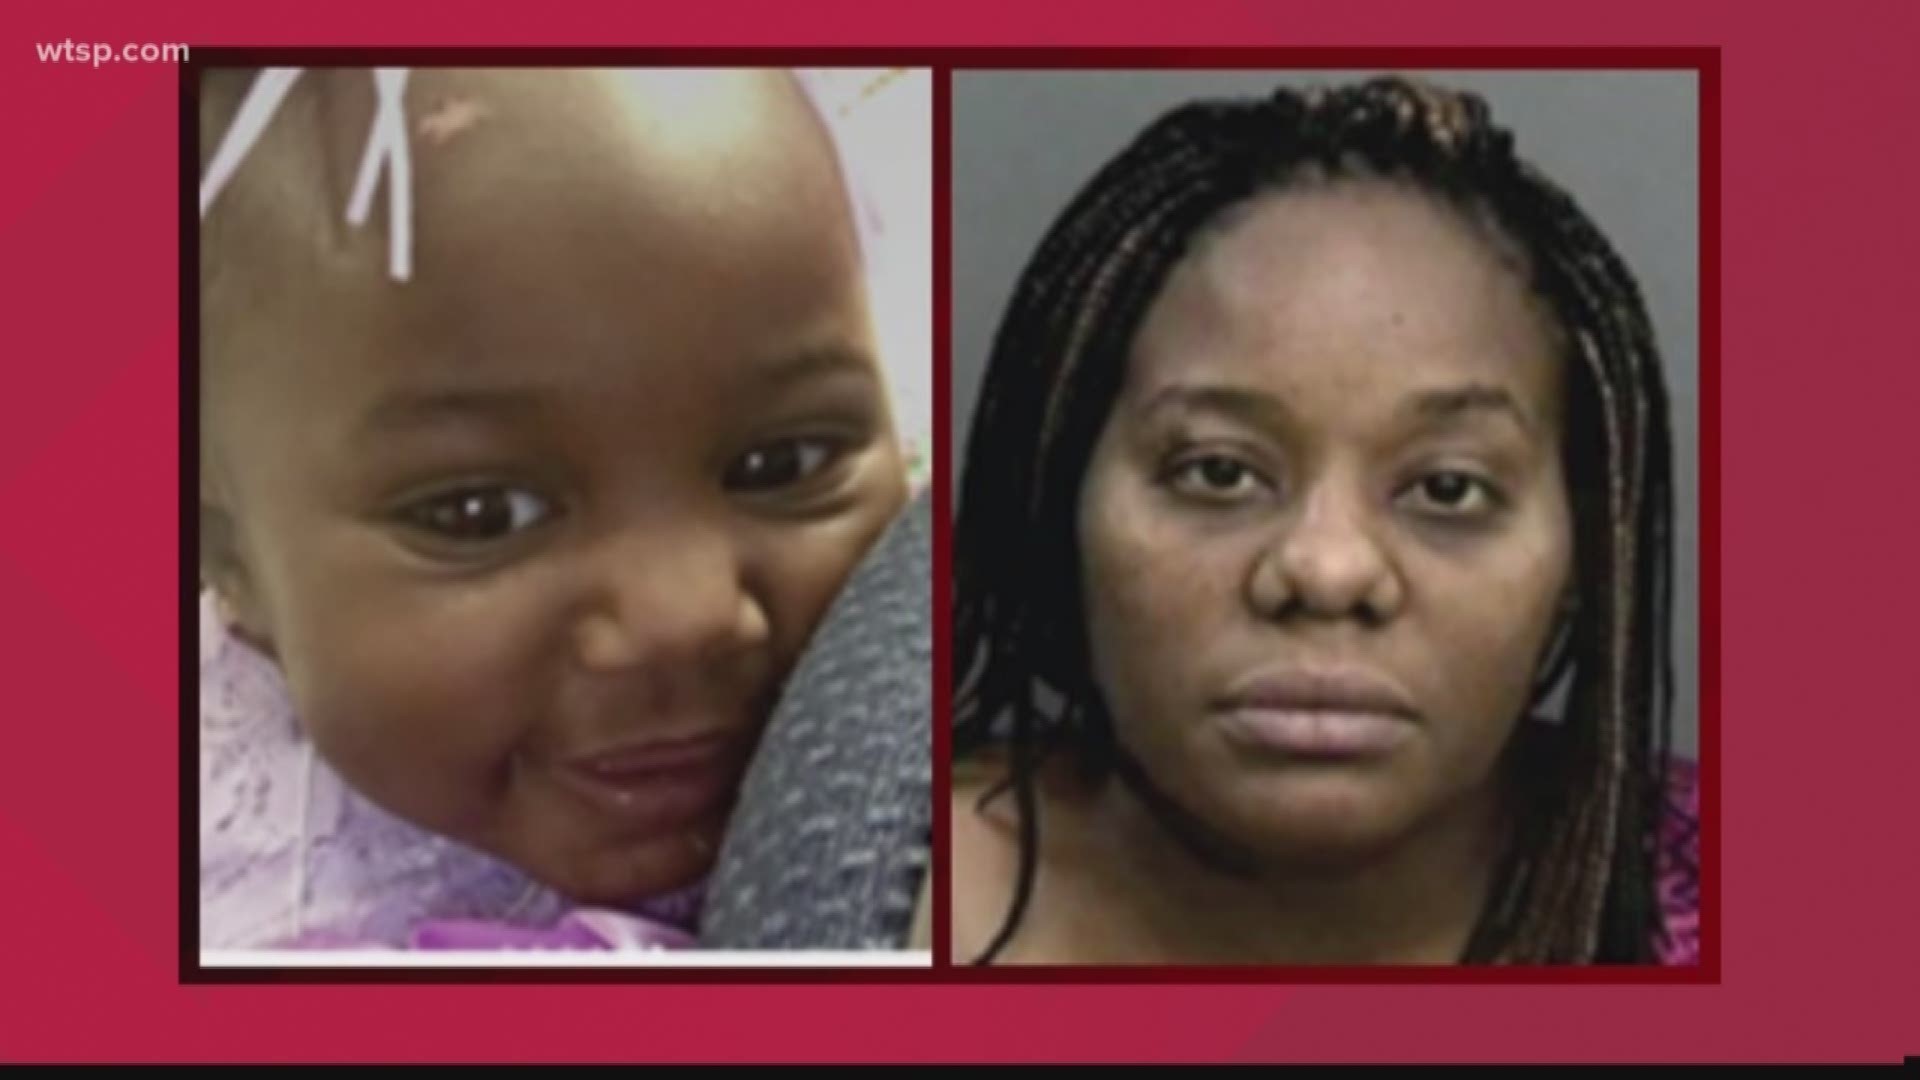 A Florida Missing Child Alert has been issued for a 1-year-old girl who was last seen in Tampa.

Investigators say Philyonnie Williams-Jones was last spotted in the 8000 block of Shady Wood Drive. She is described as 2 feet tall and 37 pounds. She has black hair and brown eyes.